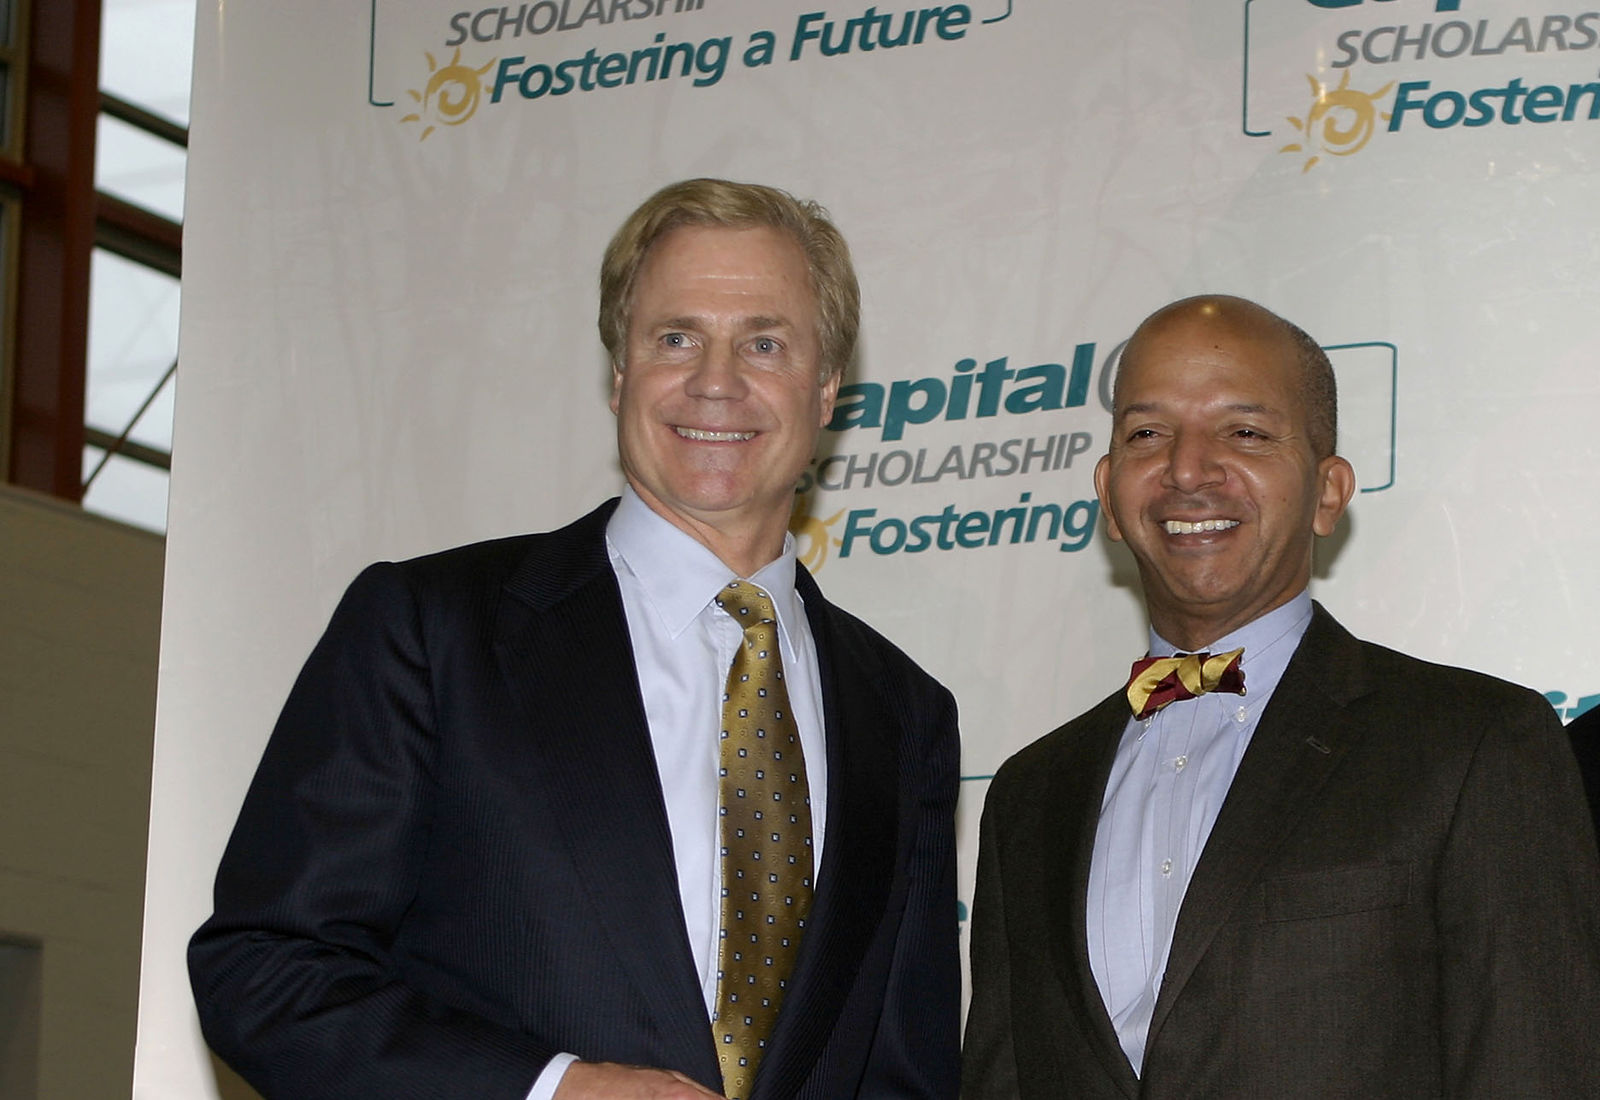 Capital One Founder and CEO, Richard Fairbank, seen here in 2004 with then D.C. Mayor Anthony Williams, was ranked No. 64 on Glassdoor's list of the top 100 CEOs in the U.S. File. (Photo by Shaun Heasley/Getty Images)